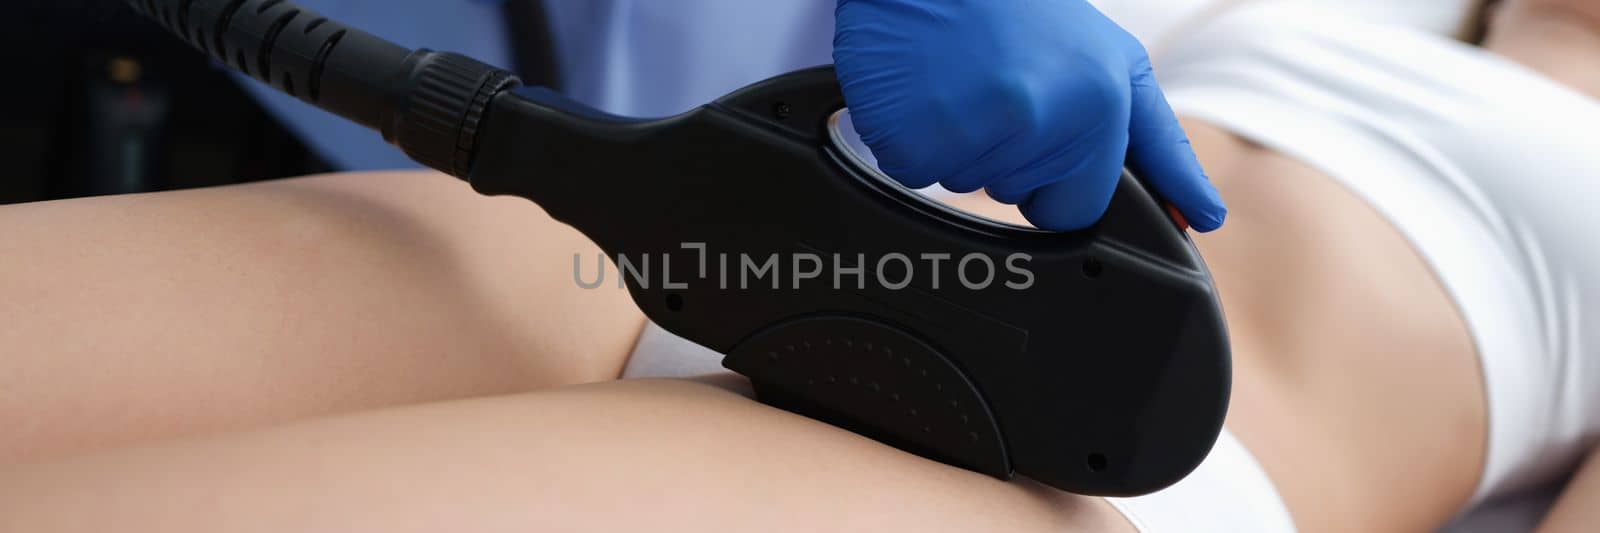 Beautician removes hair in bikini area with laser. Client in underwear for laser hair removal in bikini area